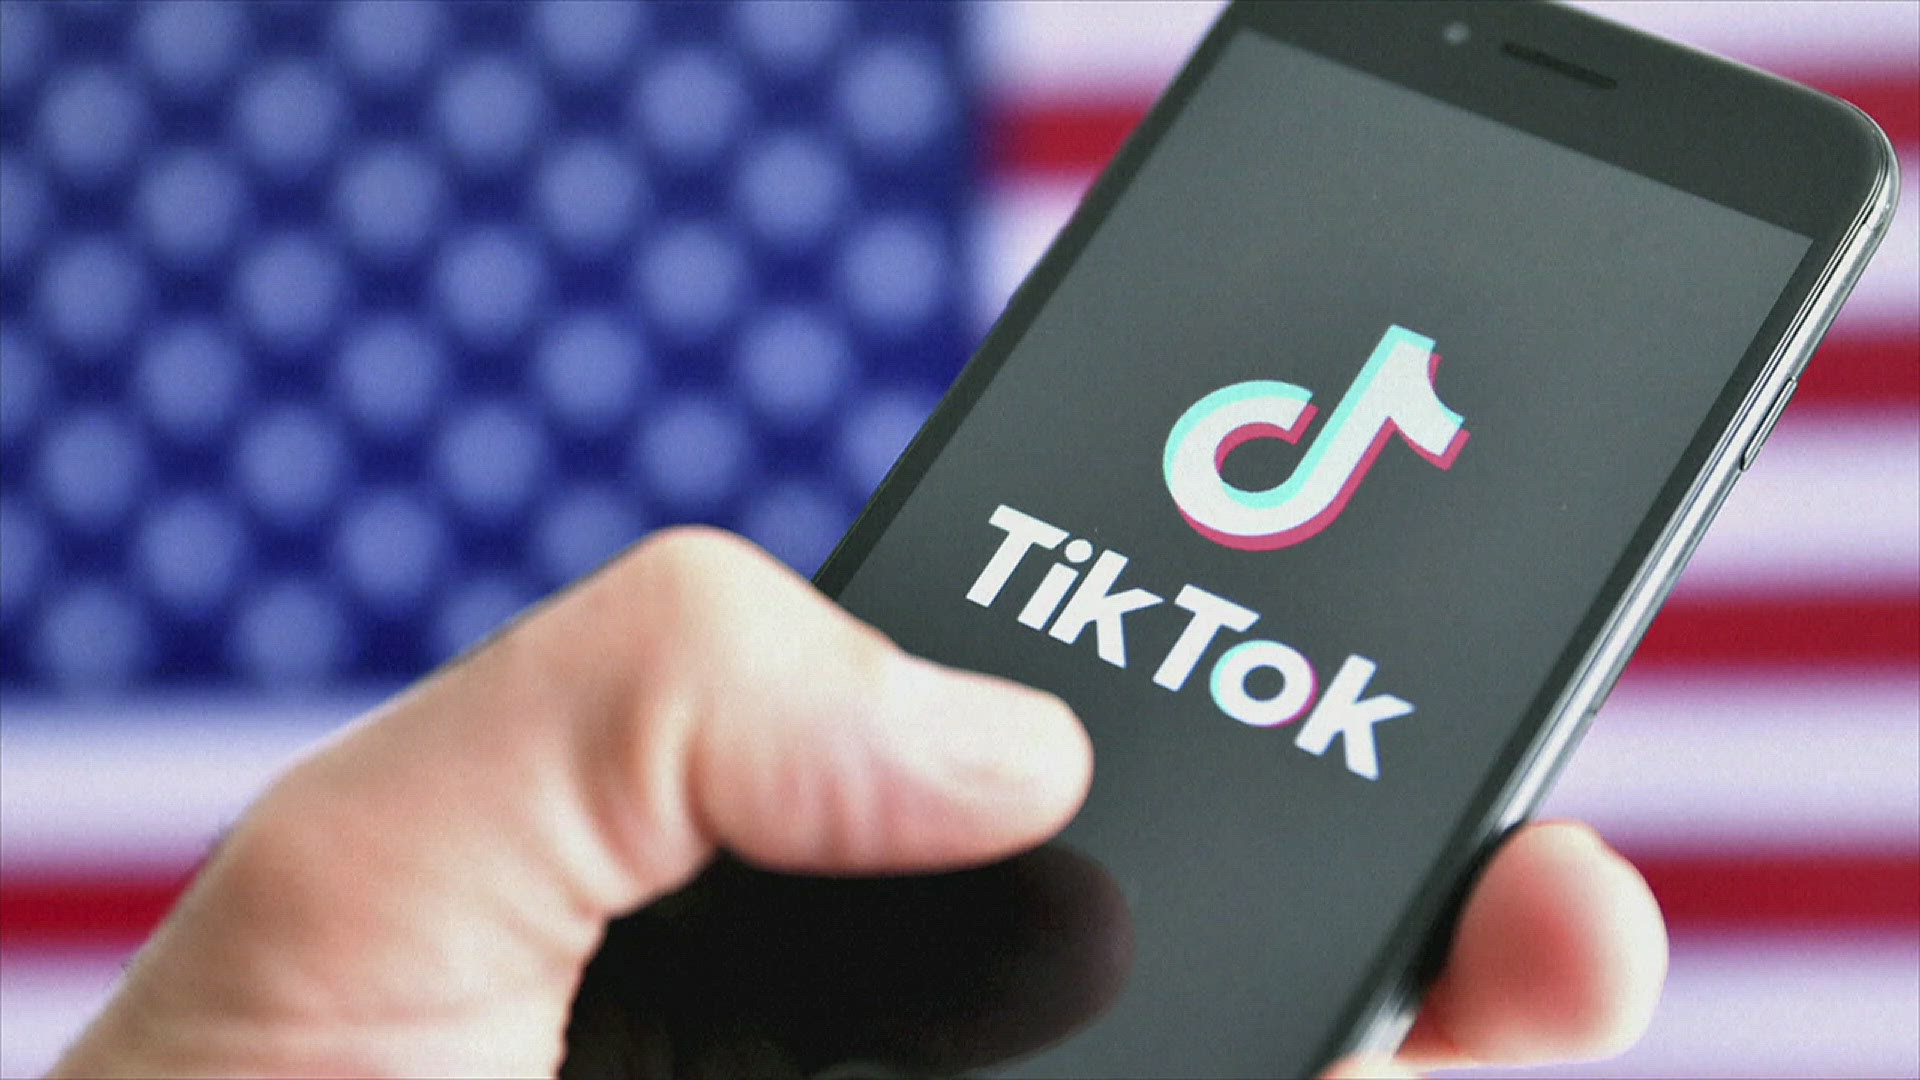 Tik Tok is fighting back after current U.S President Biden signed a bill last month. The bill could fully ban the app unless it gets sold to non-Chinese buyer.